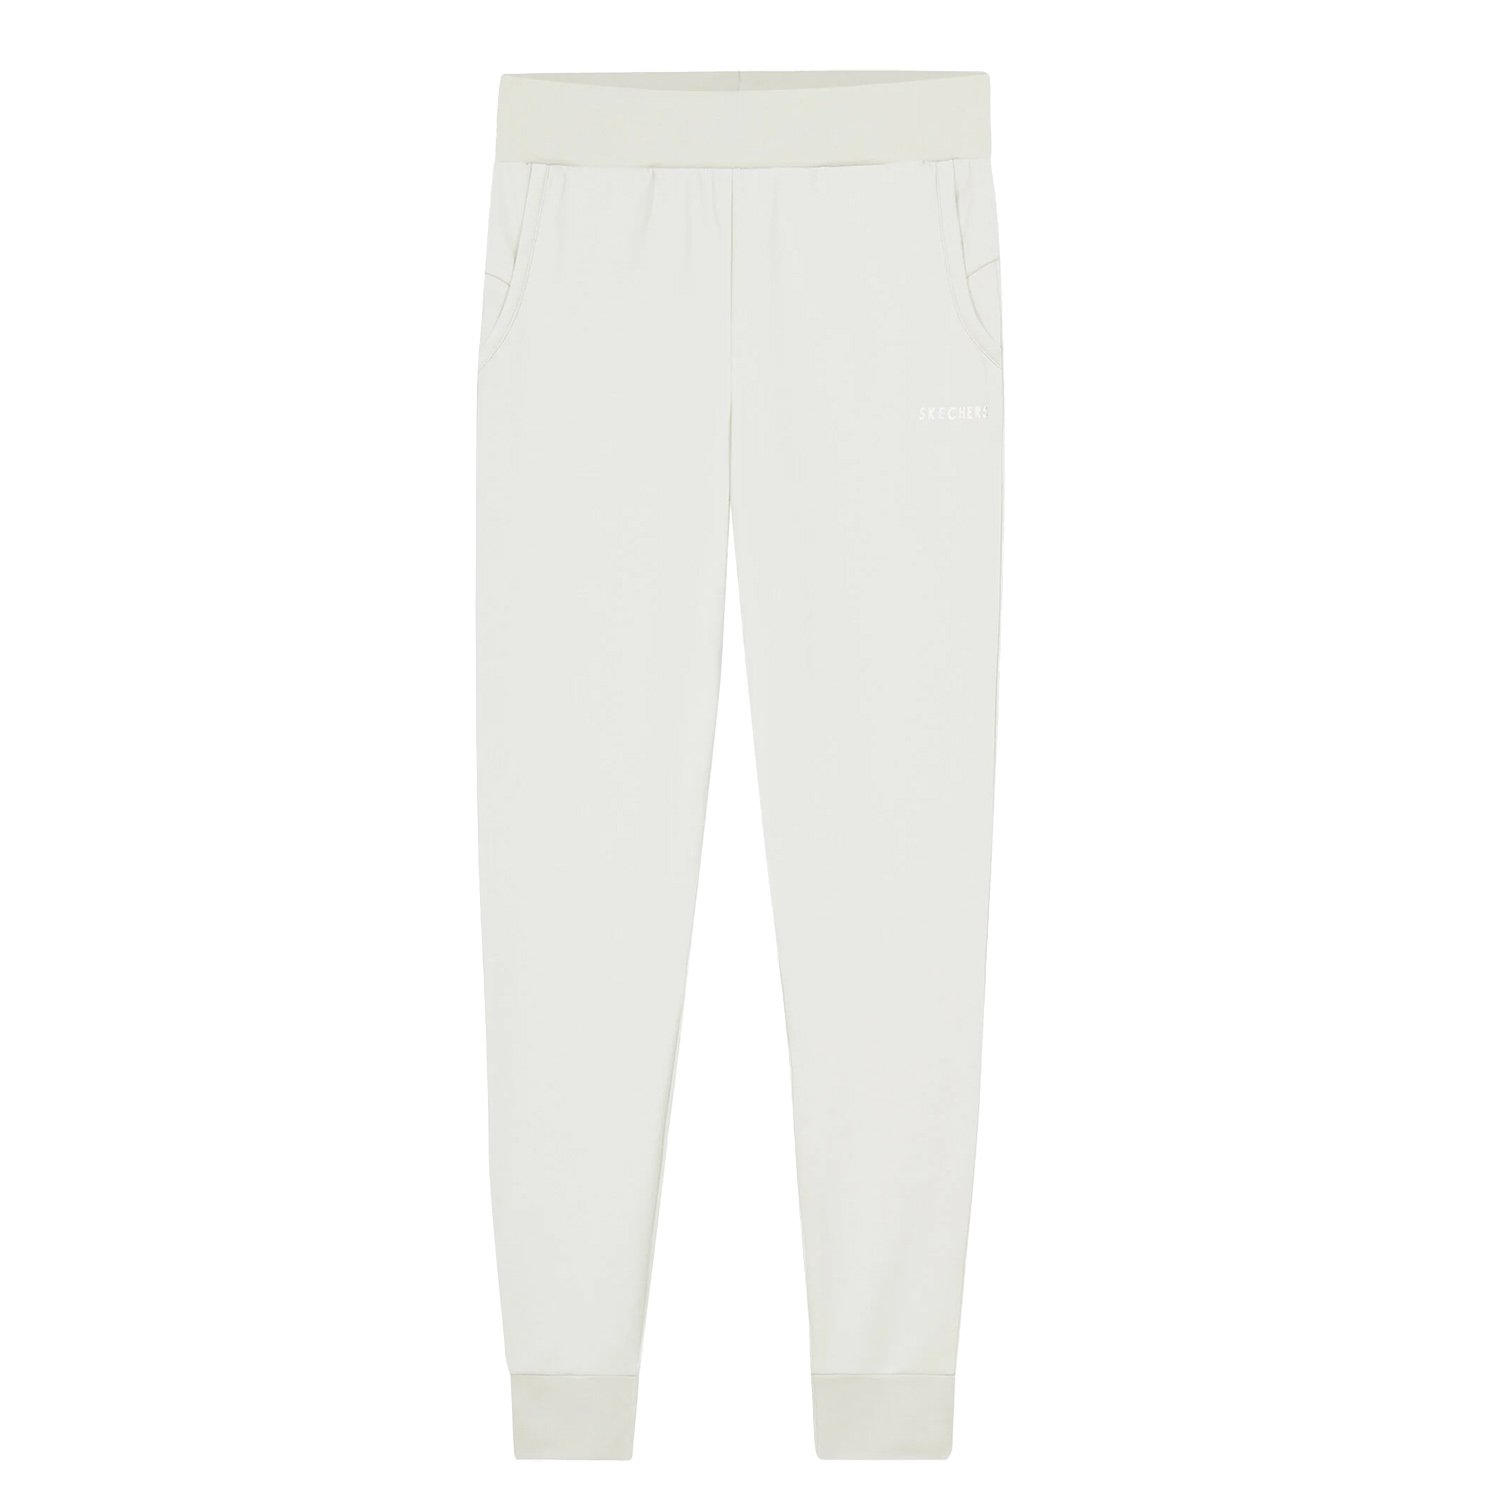 Soft Touch Sweatpant -  - 1